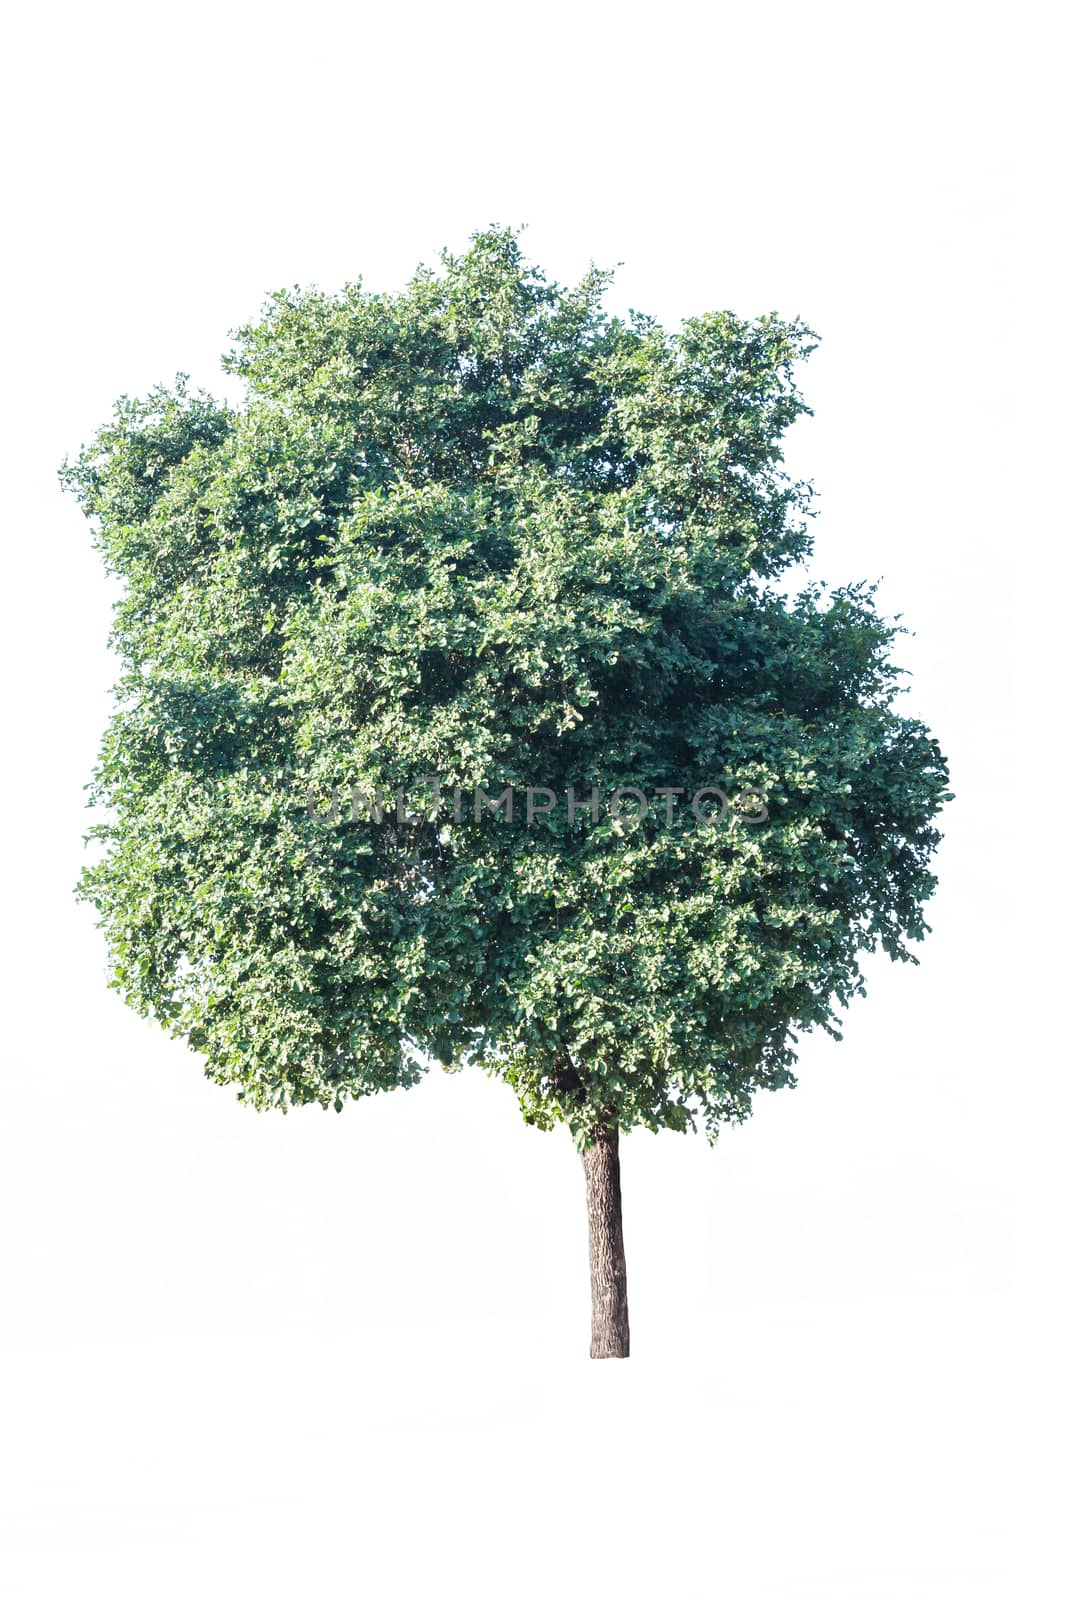 green tree isolated on white background by rakoptonLPN